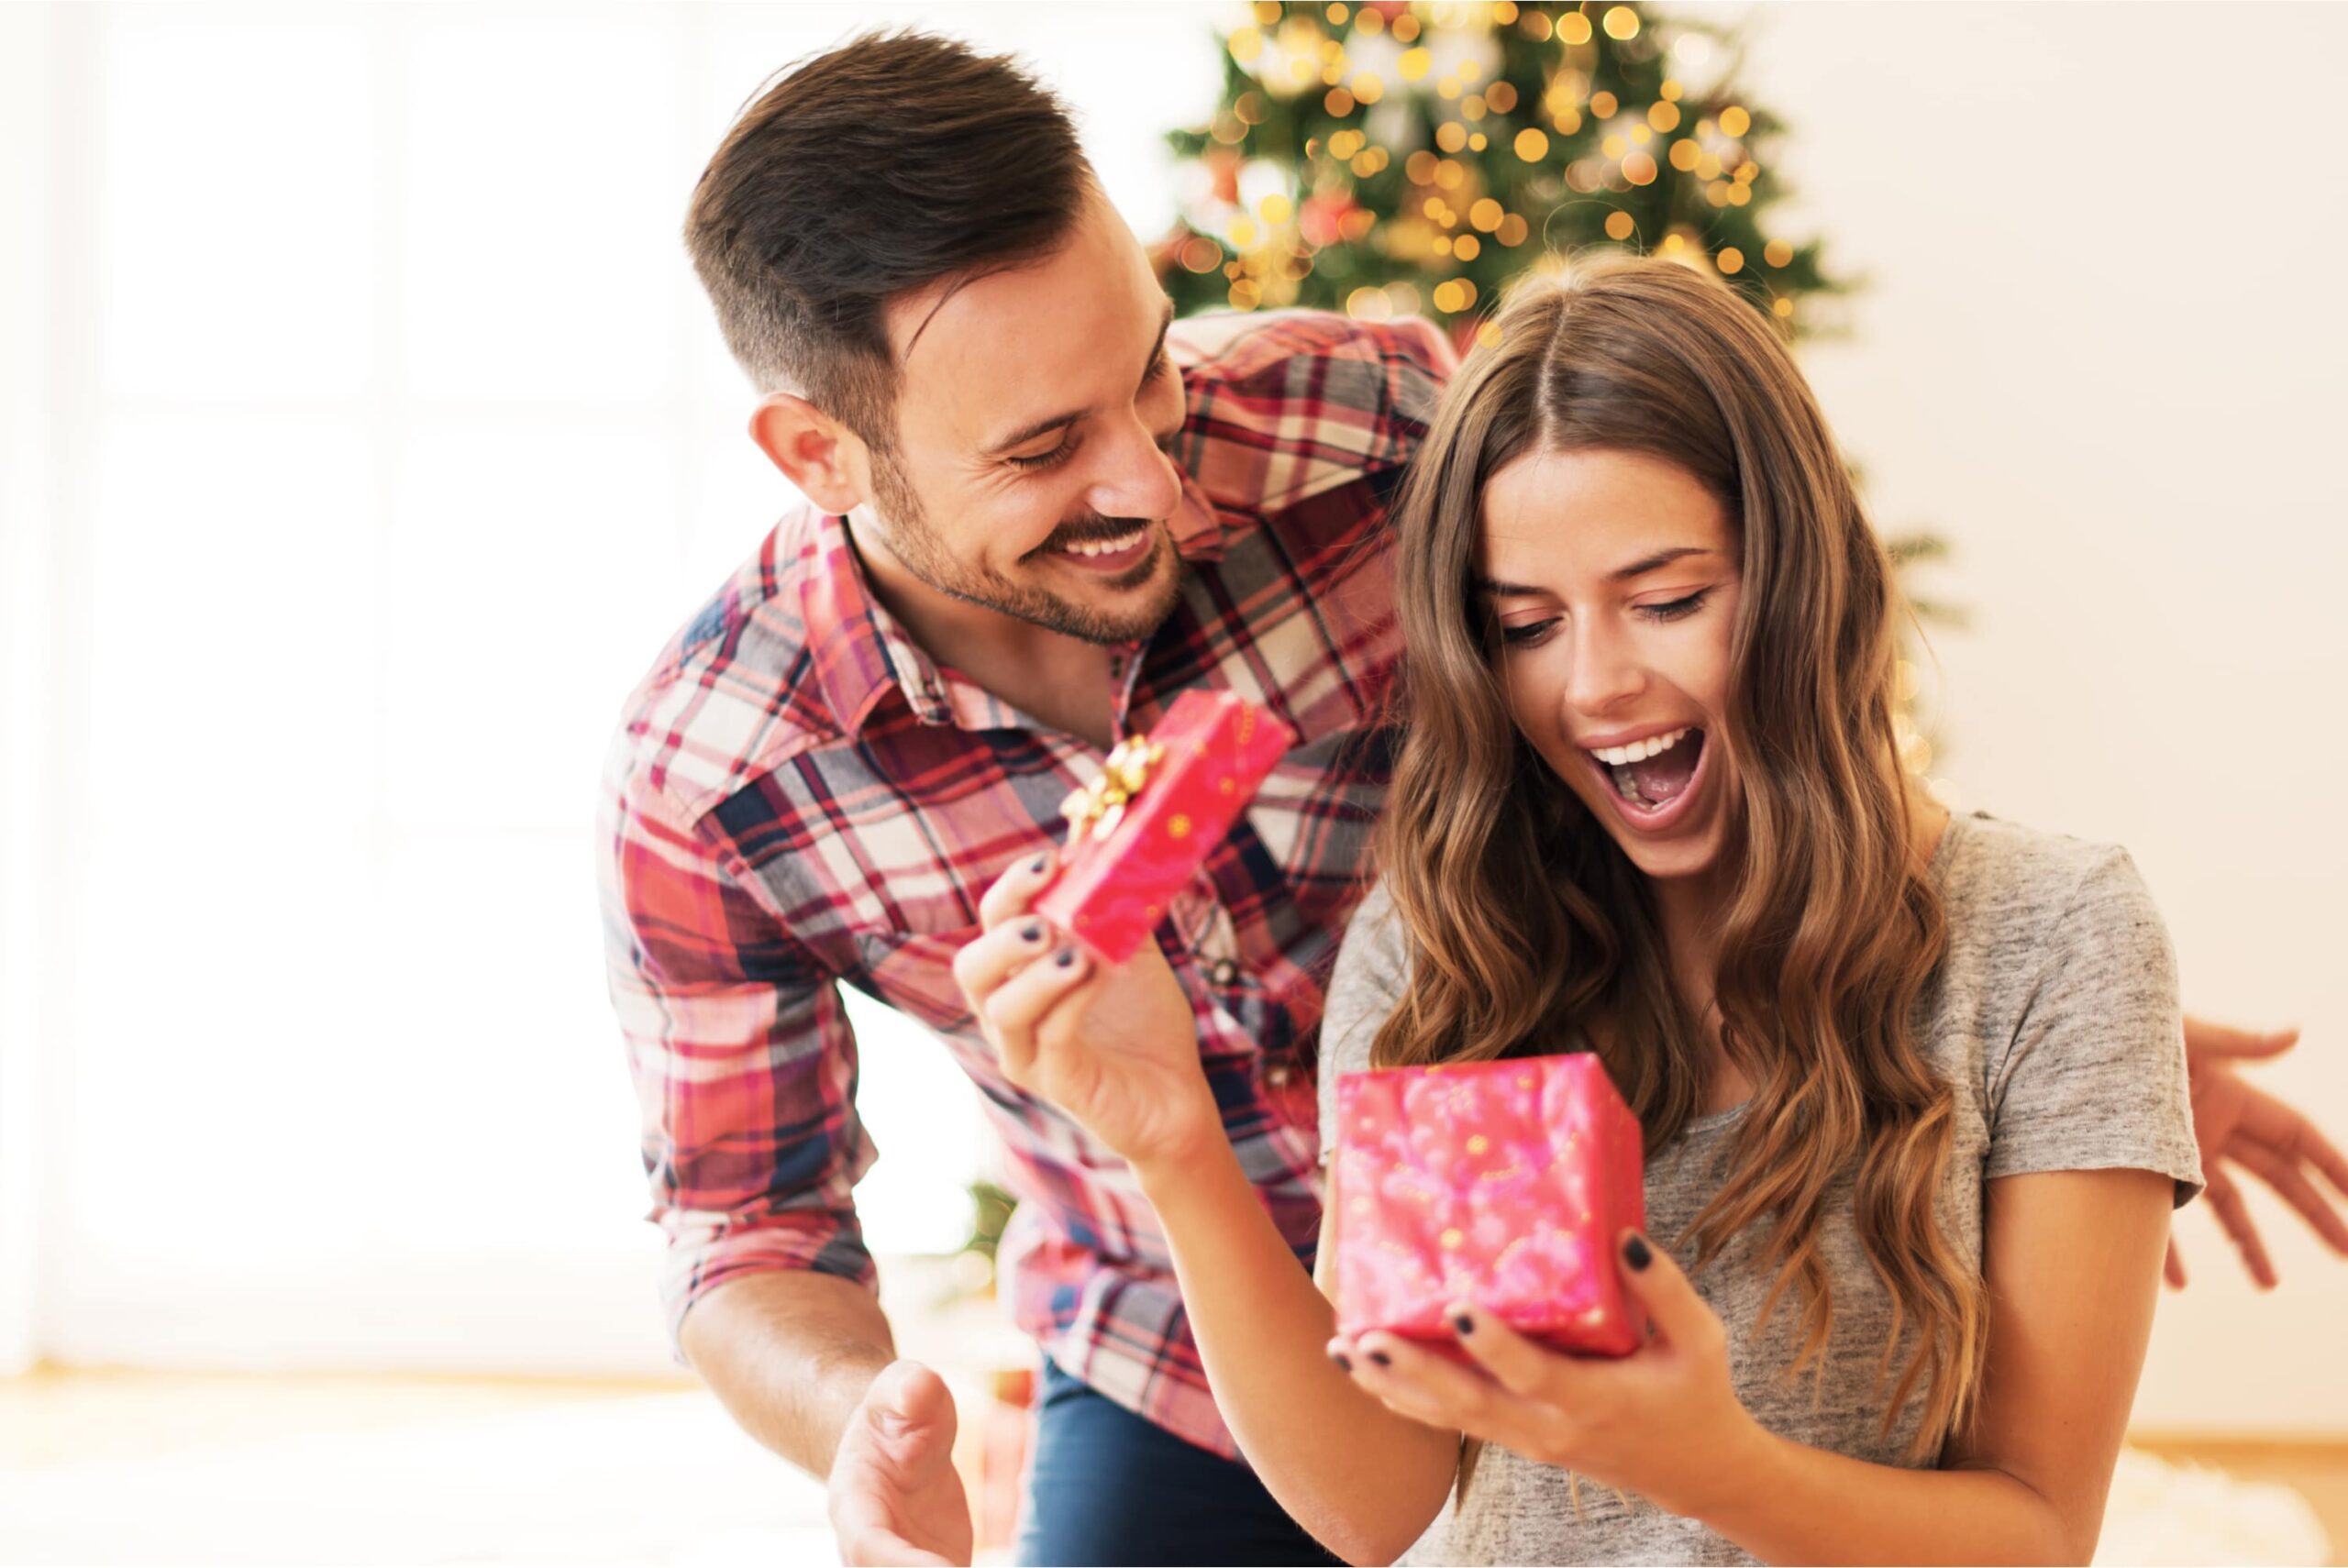 Essential Christmas Gift Ideas to Captivate Your Girlfriend